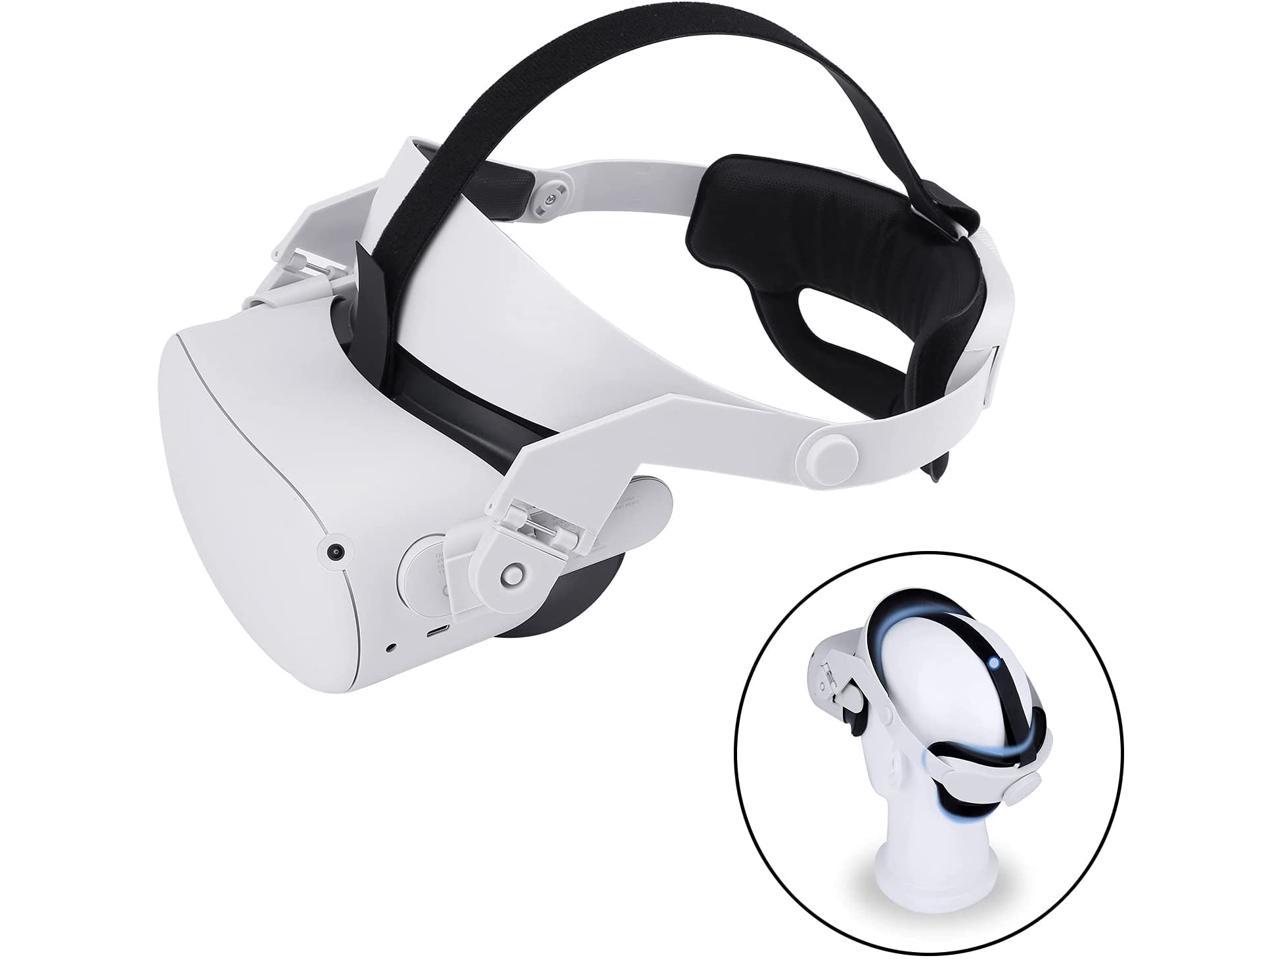 Head Strap for Oculus Quest 2 Accessories,MODJUEGO 2021 New Upgrade Oculus Quest 2 Forehead Strap White Adjustable VR Headband Replacement 